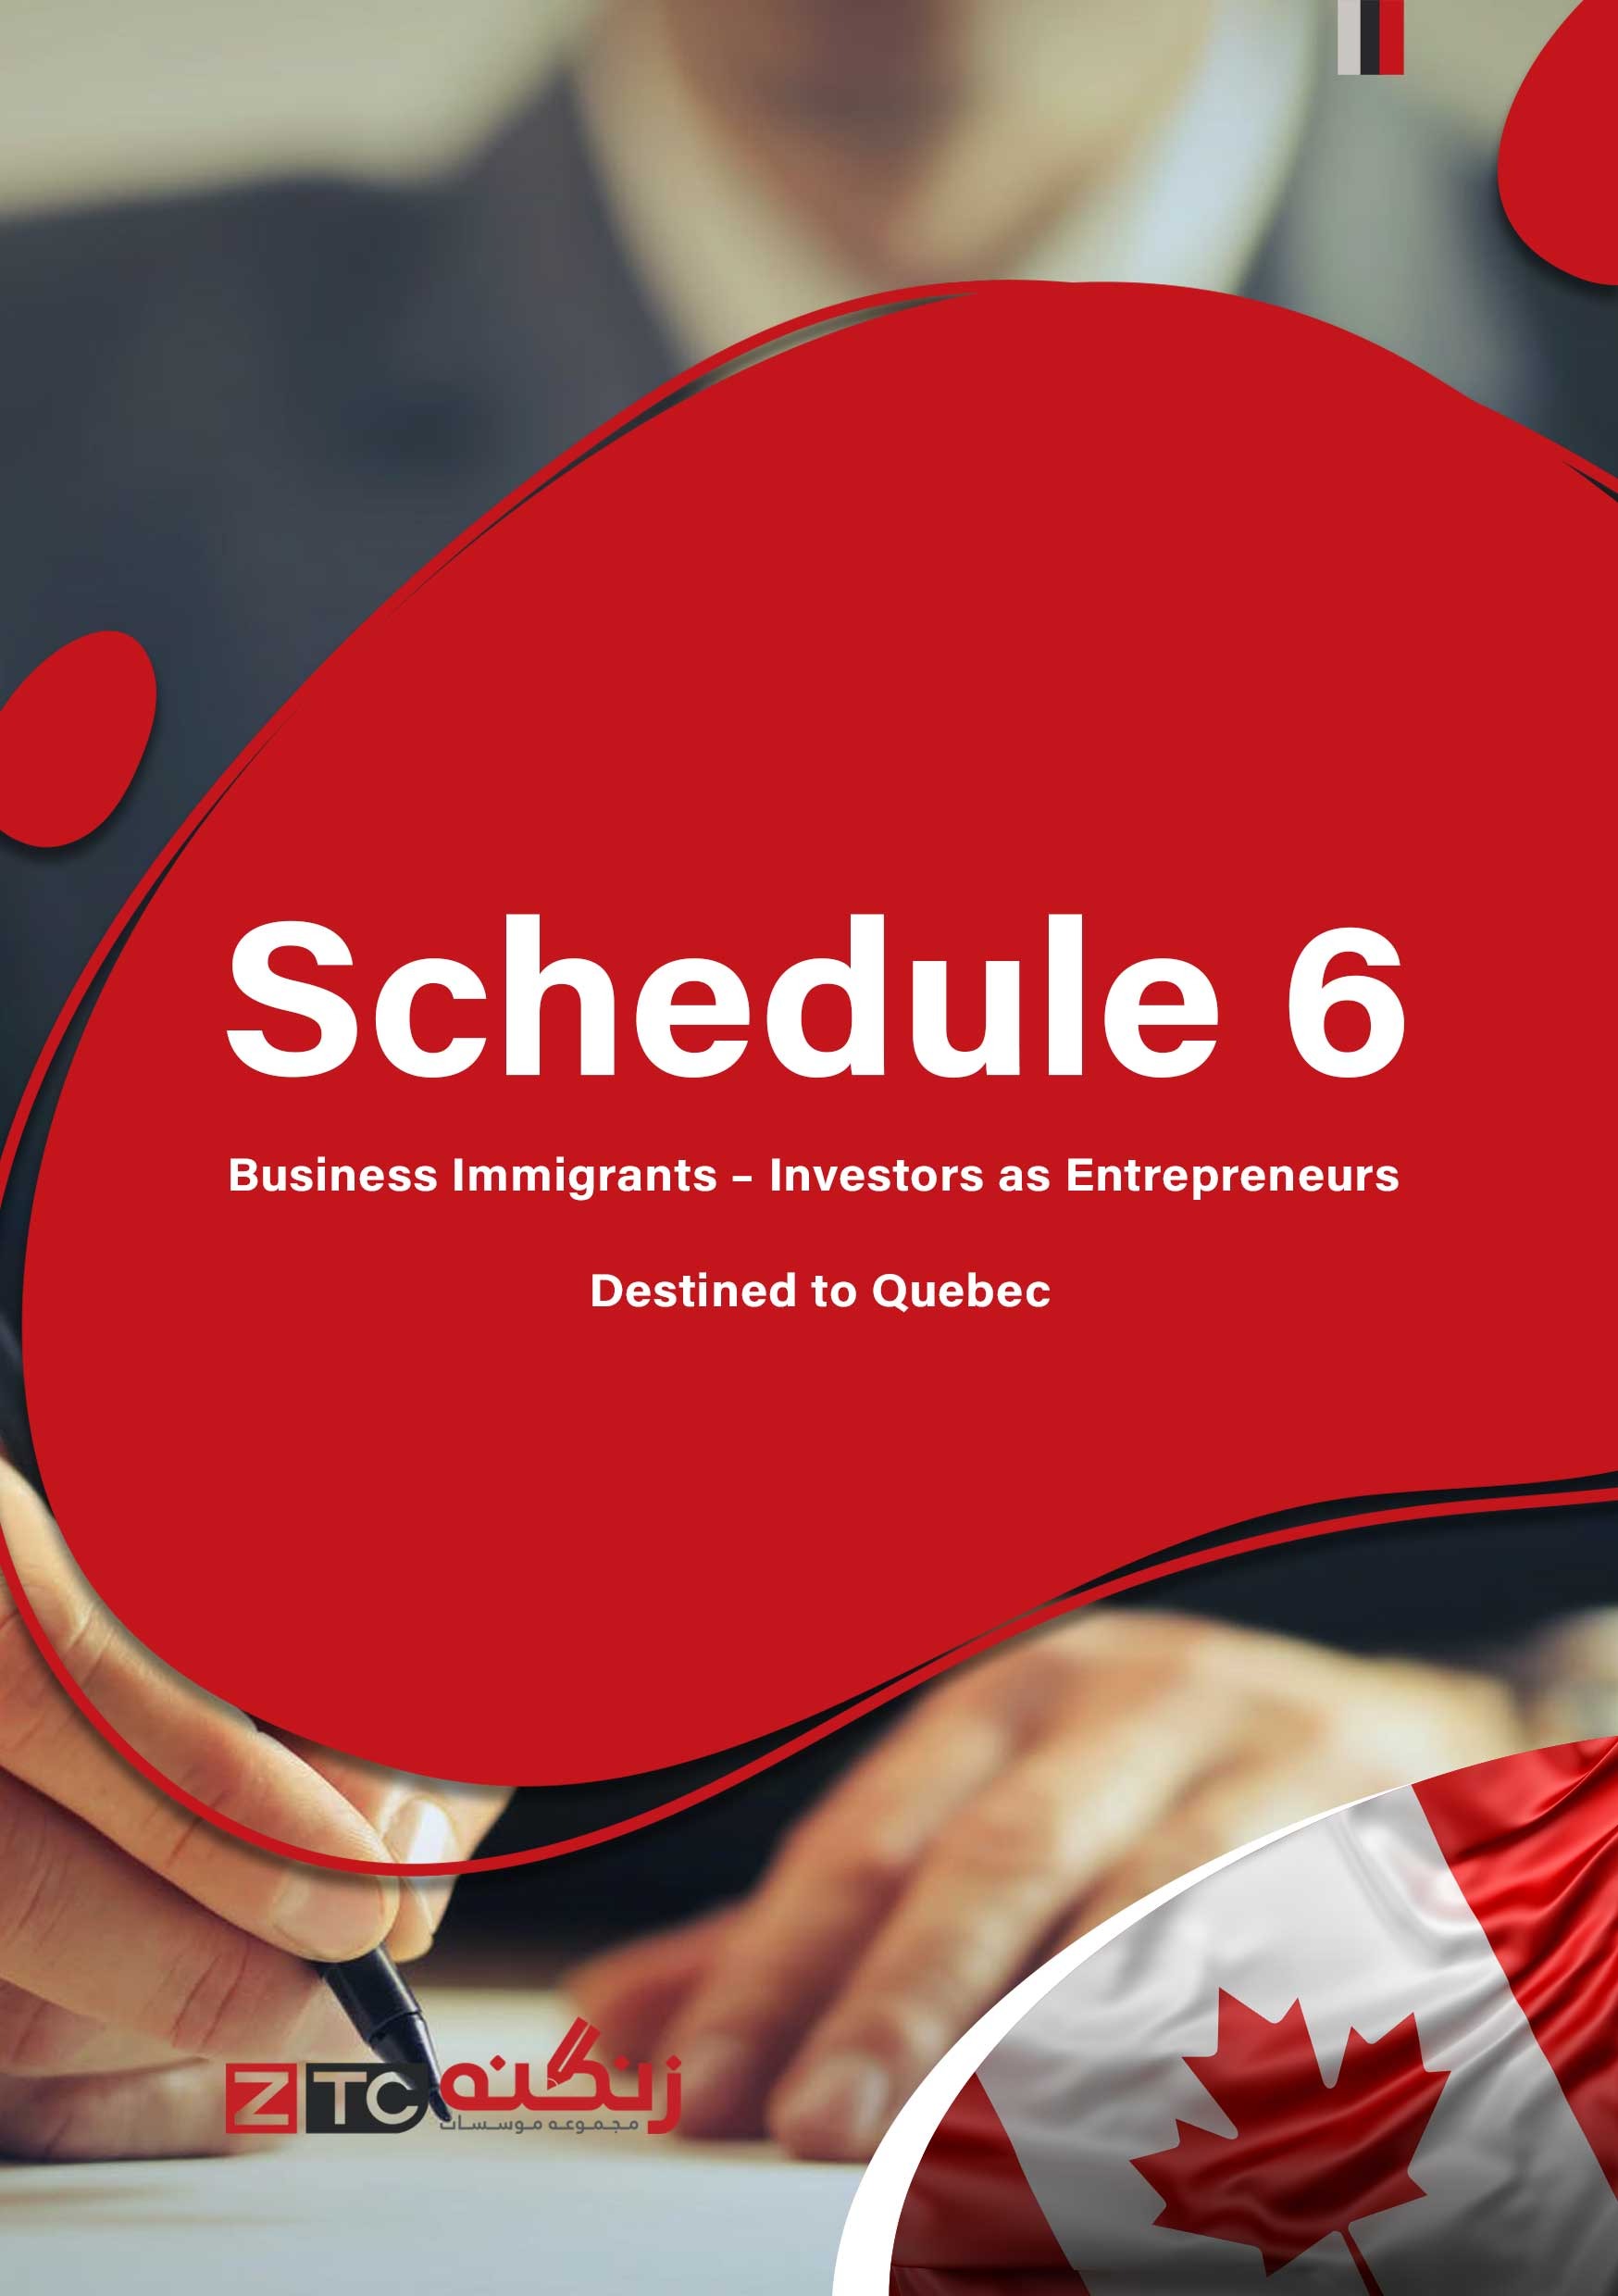 Schedule 6 Business Immigrants – Investors as Entrepreneurs Destined to Quebec